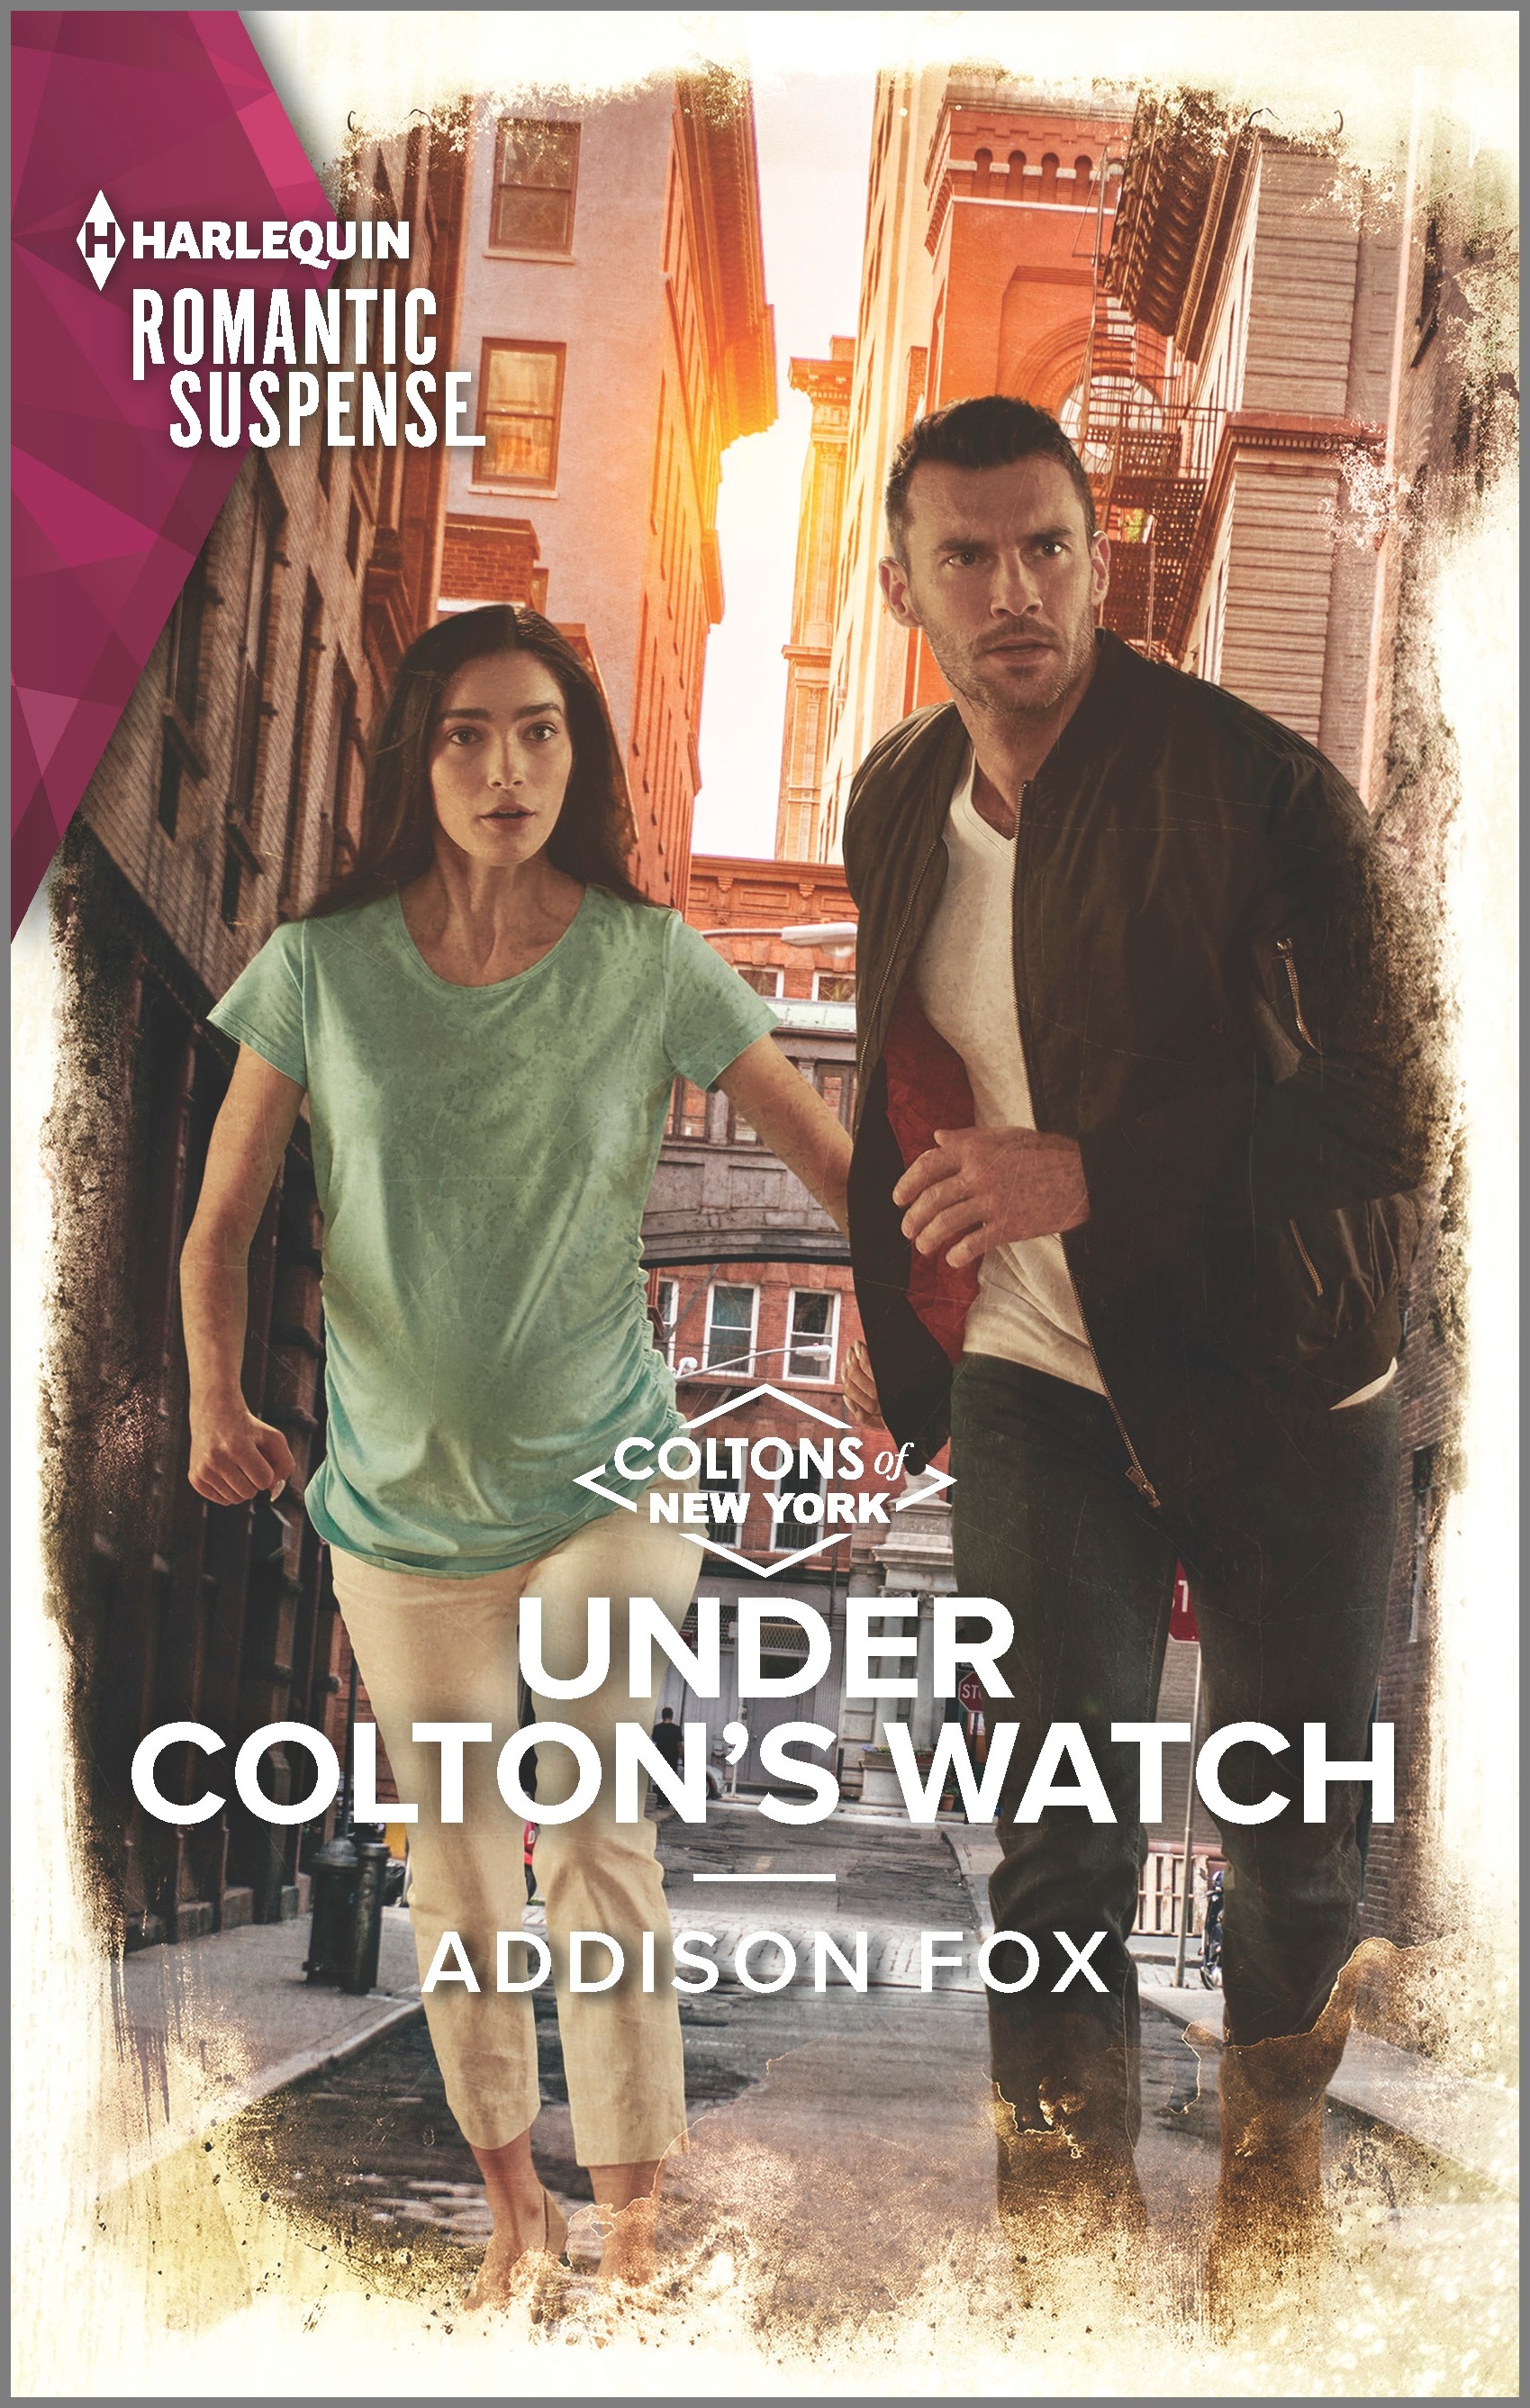 Cover image for UNDER COLTON'S WATCH by Addison Fox, featuring a woman and a man running down a city street. The sun is setting behind them. 